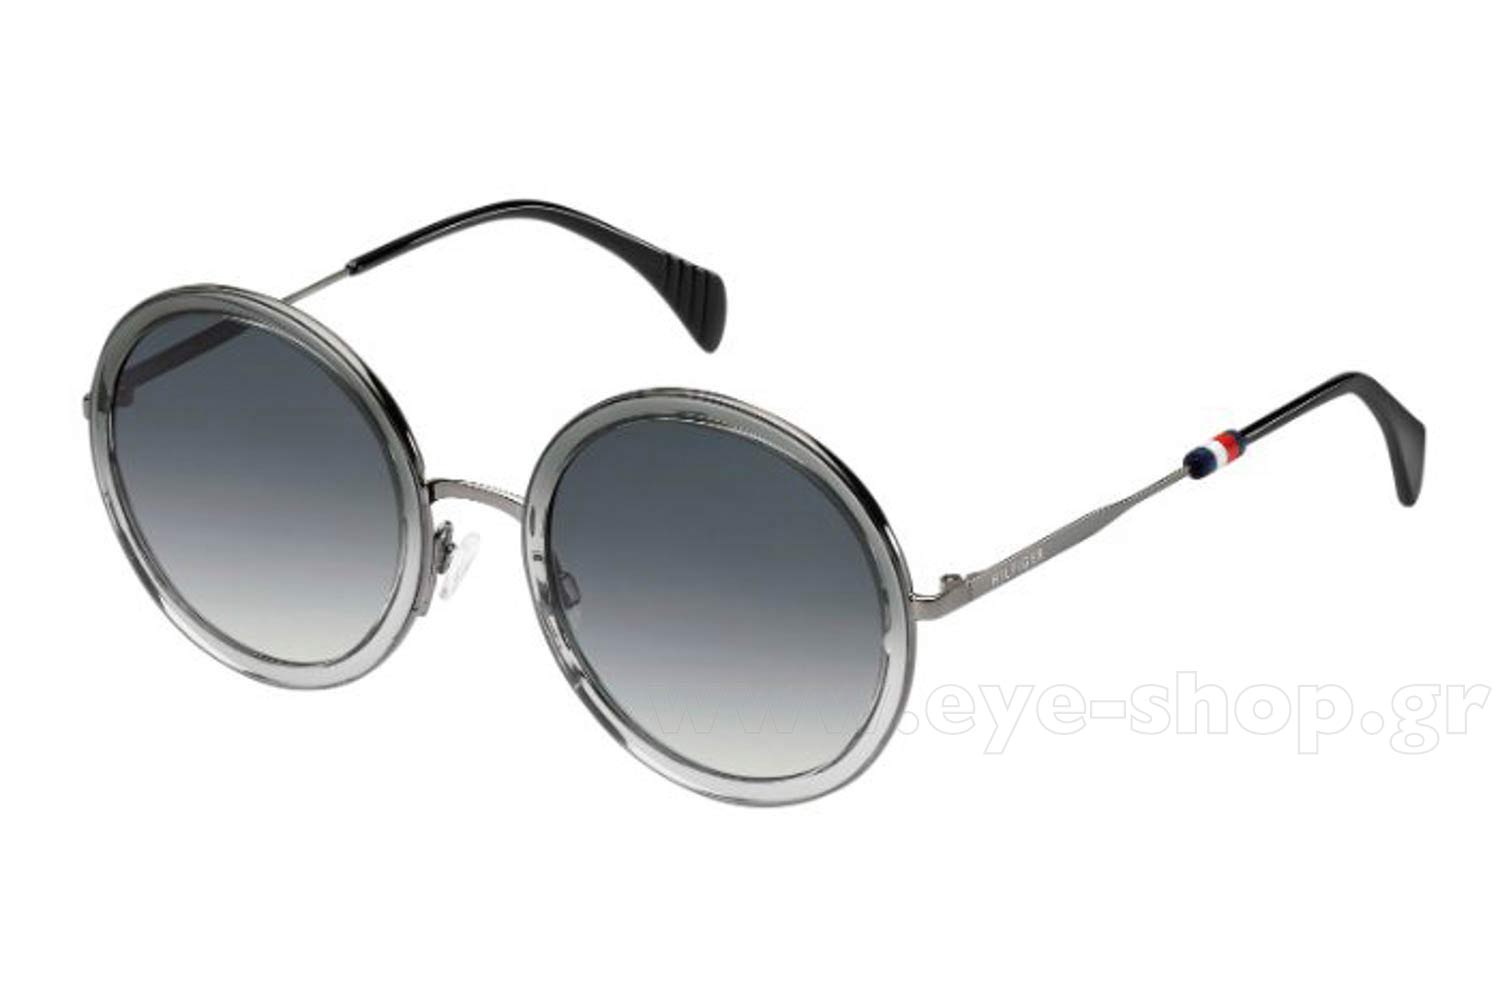 Tommy Hilfiger TH 1474 S